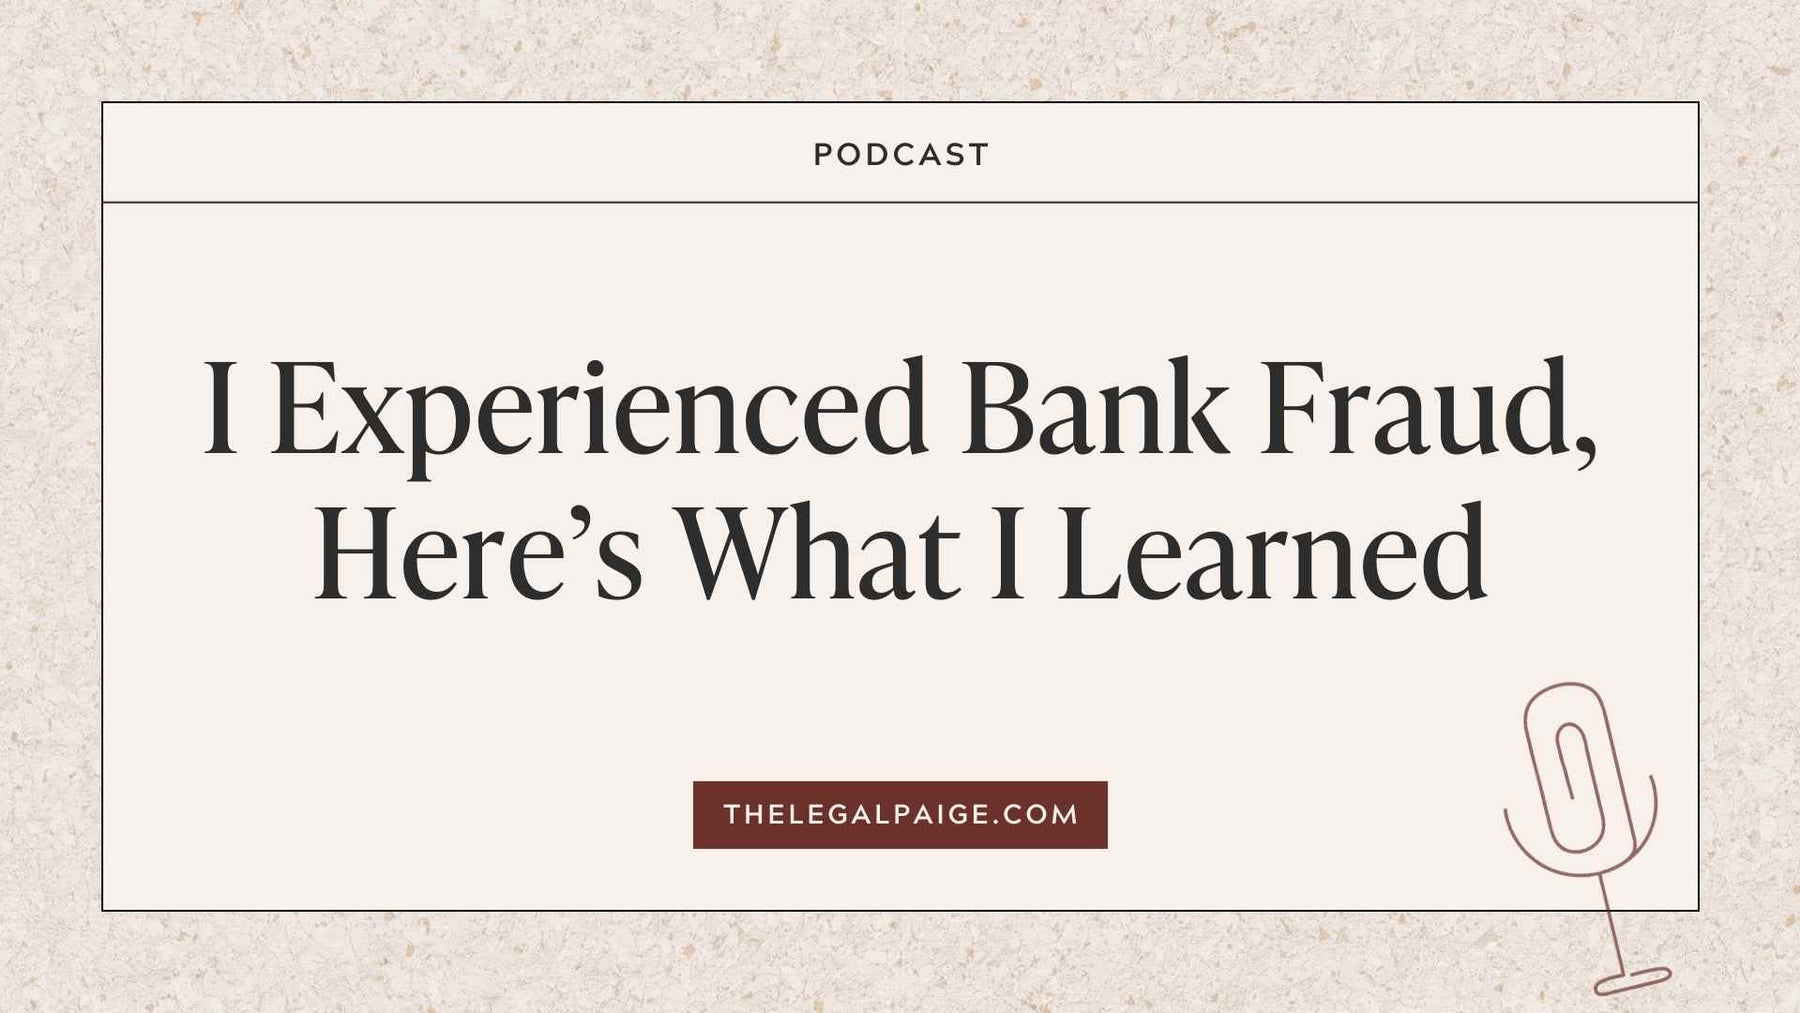 I Experienced Bank Fraud, Here's What I Learned